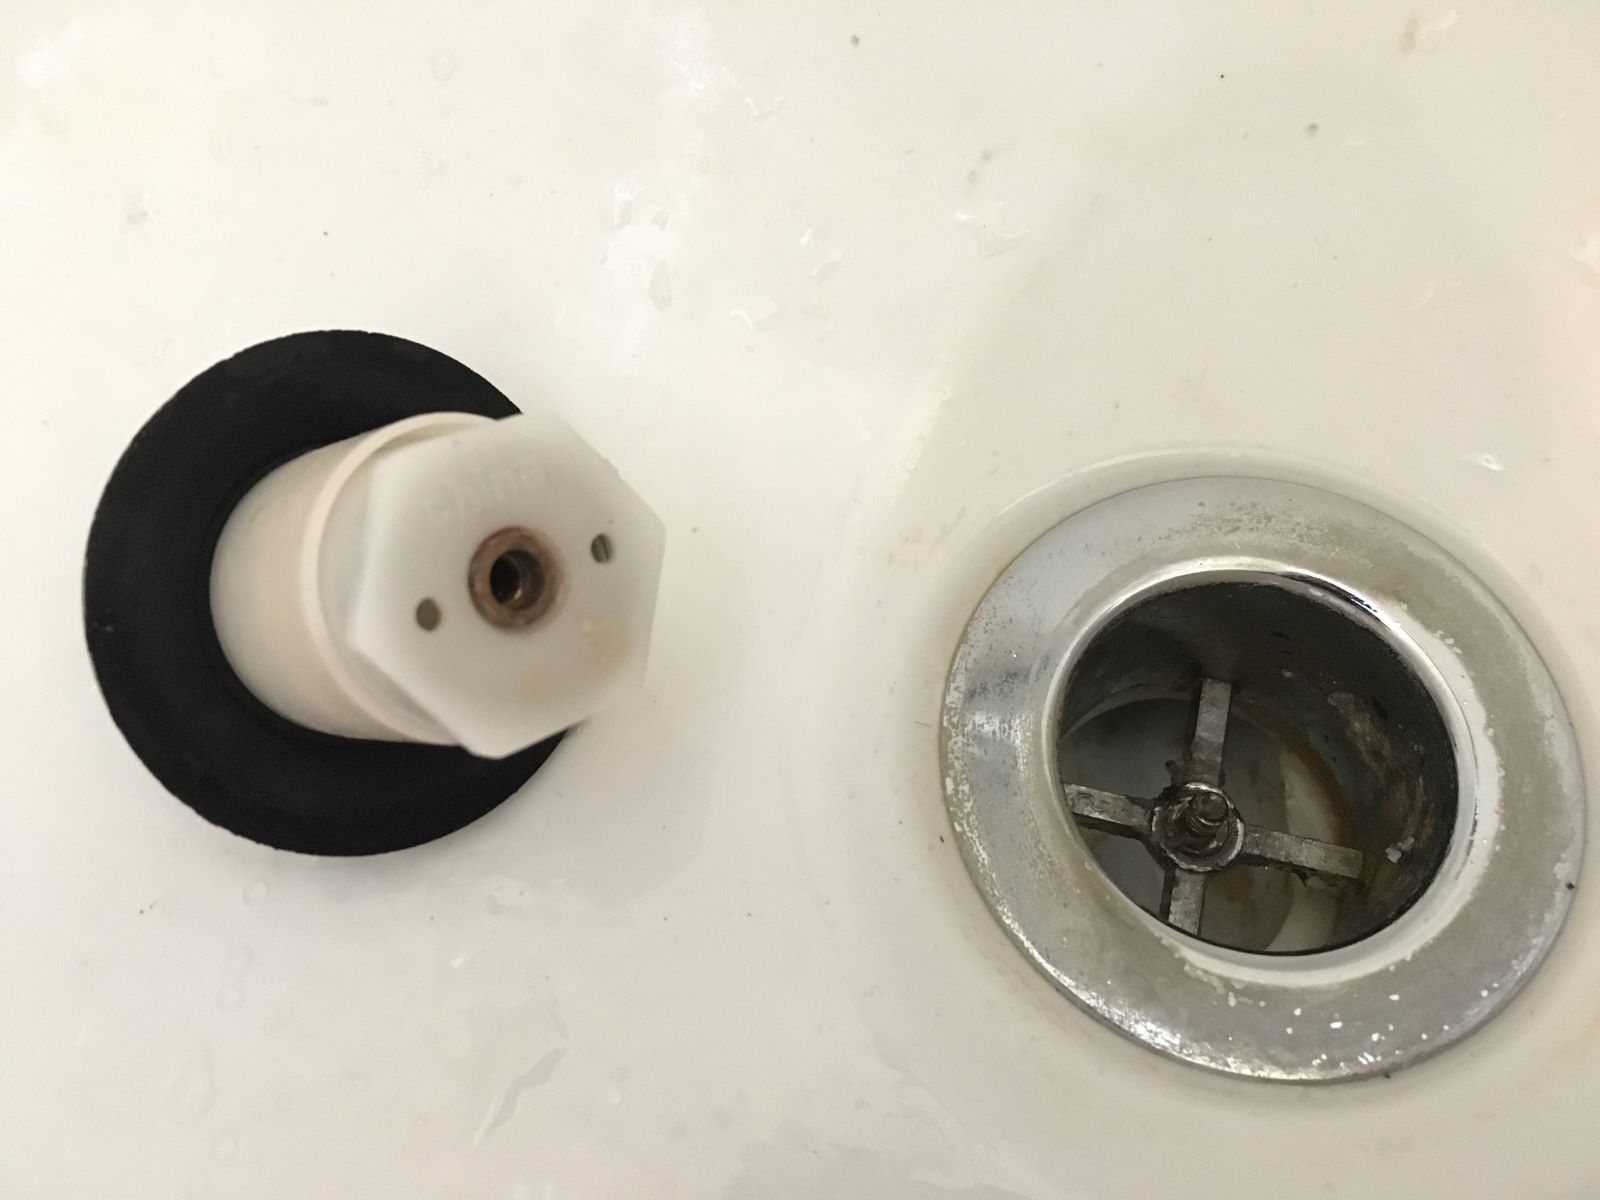 How To Remove Tub Strainer